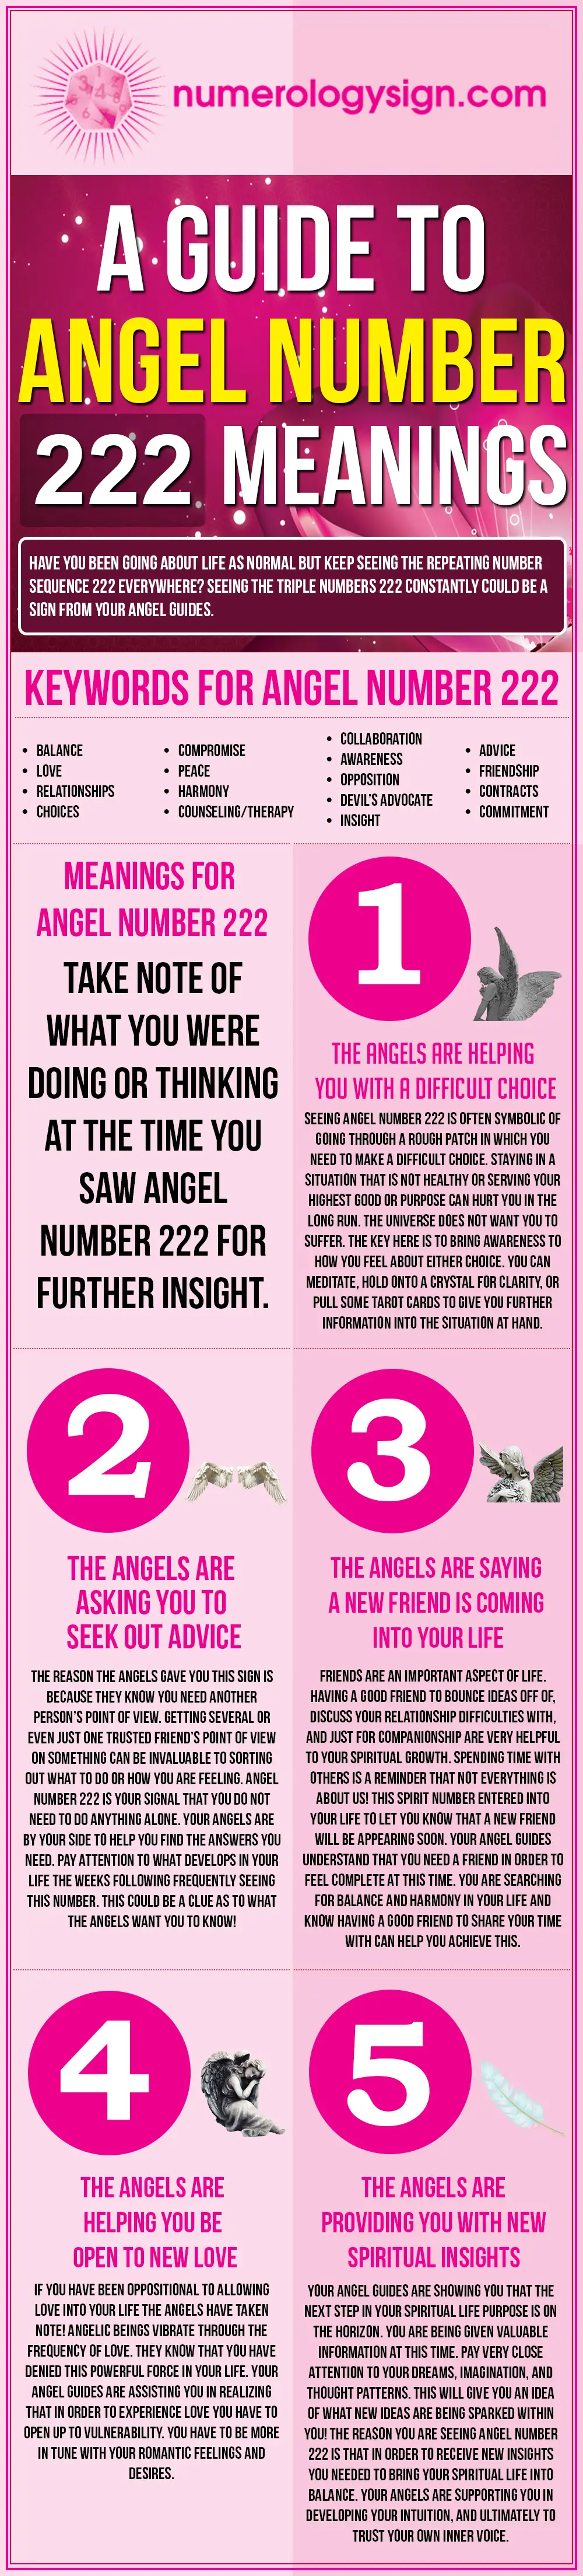 Angel Number 222 Meanings  Why Are You Seeing 2 22  Numerologysign com